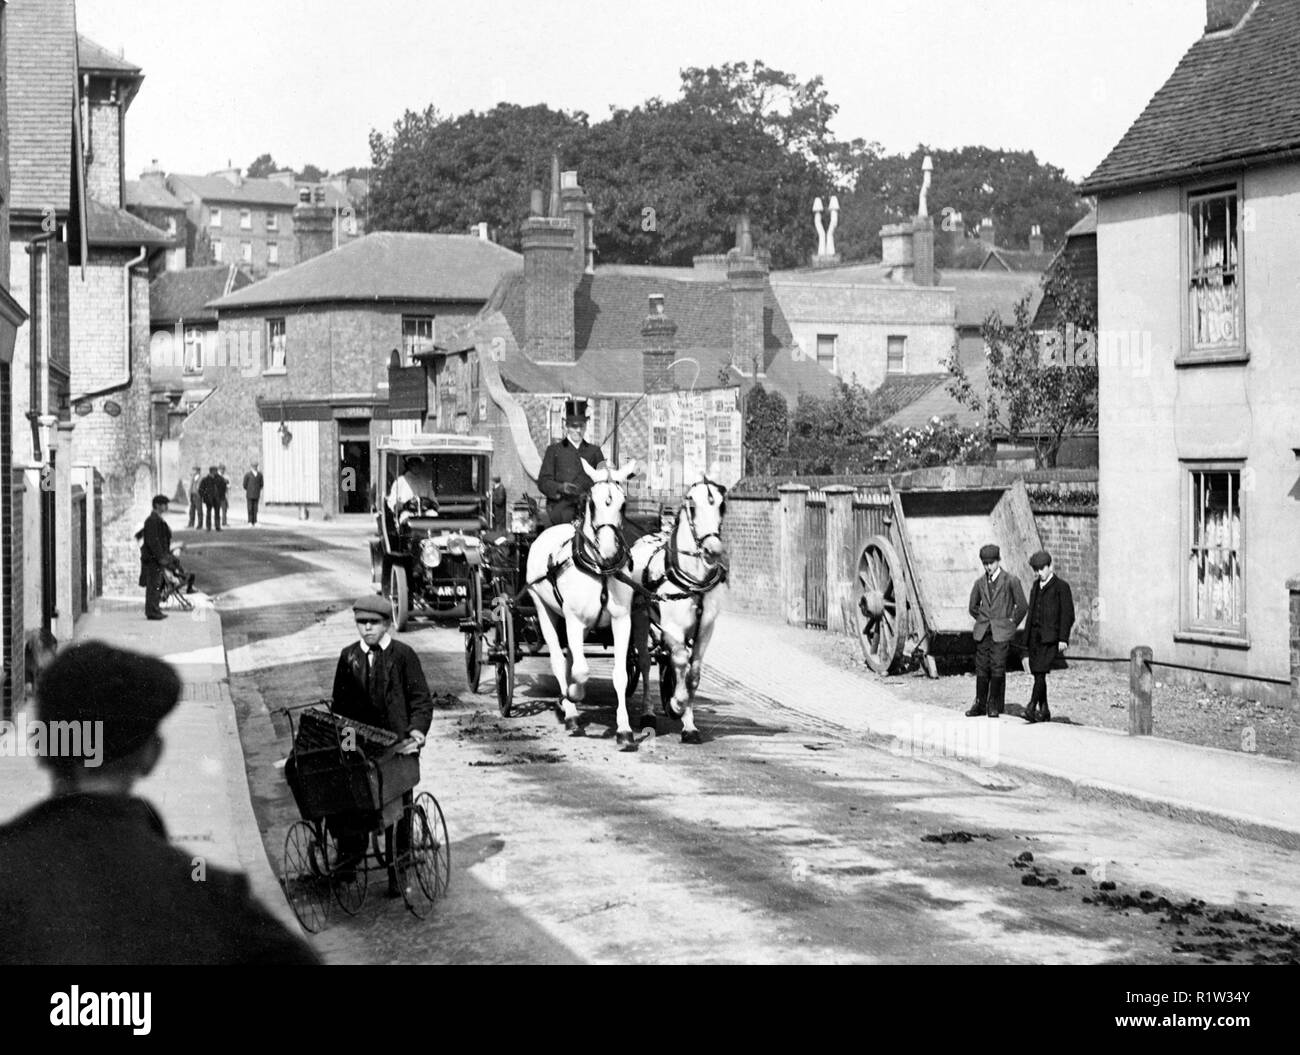 South Street, Bishops Stortford early 1900s Stock Photo